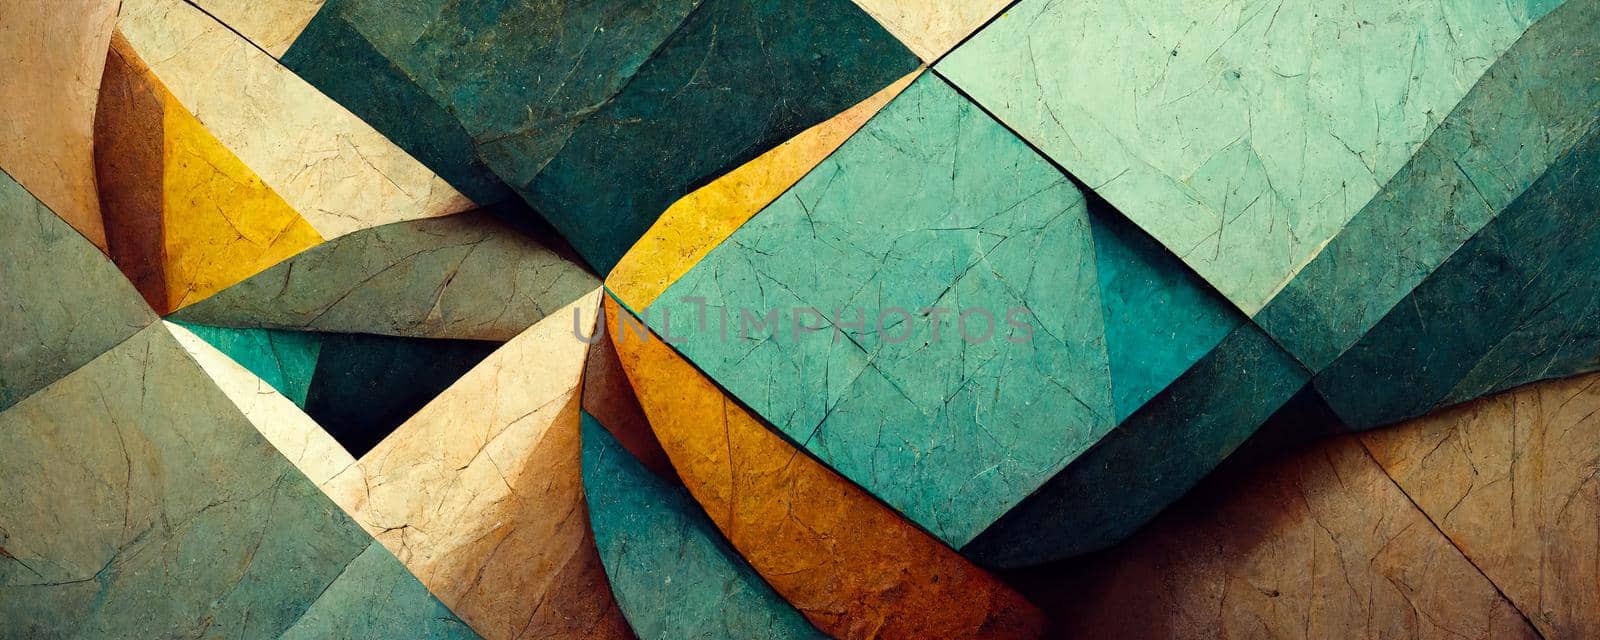 geometric background with polygons in turquoise and gold hues by TRMK